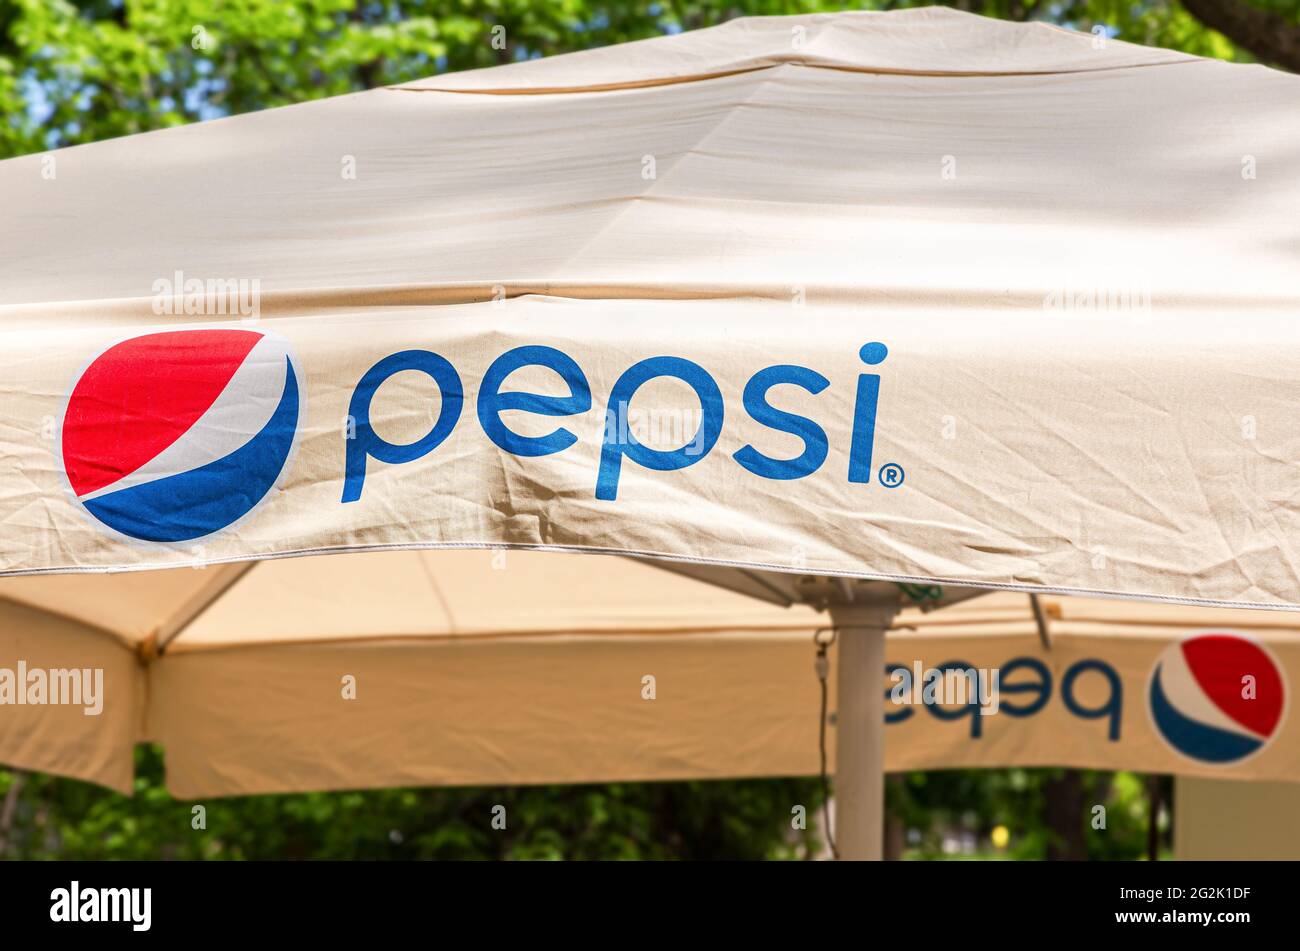 Samara, Russia - June 6, 2021: Pepsi logo and signage. Brand of carbonated soft drink by the American company PepsiCo Stock Photo